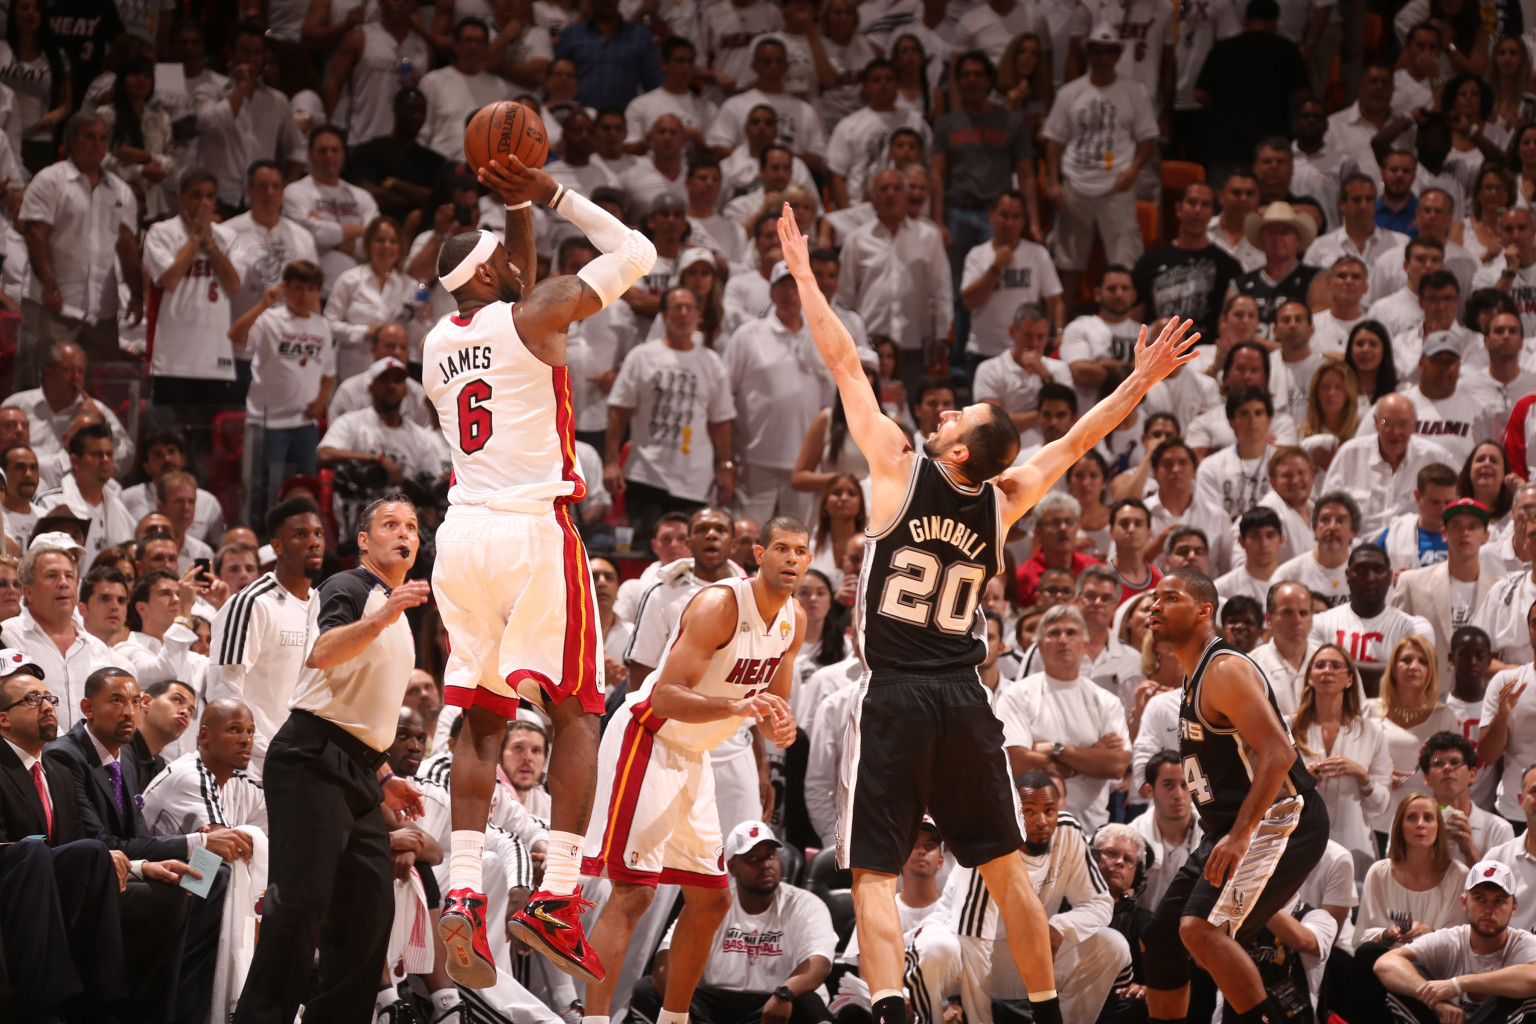 LeBron Game 7 GIF: Every Shot NBA Finals MVP Made In Final Game vs. Spurs | HuffPost1536 x 1024